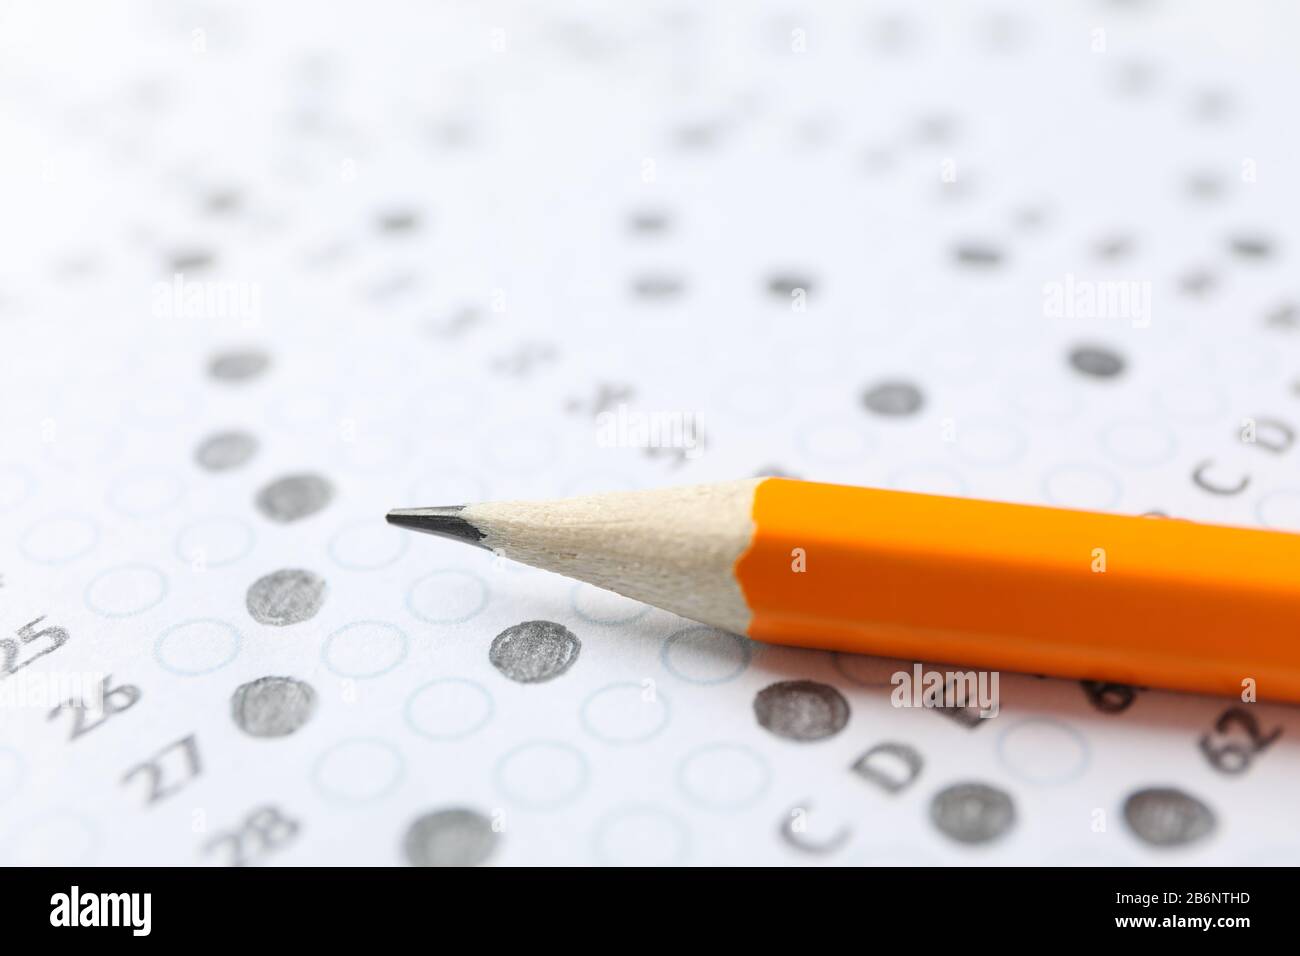 Test score sheet with answers and pencil, close up Stock Photo